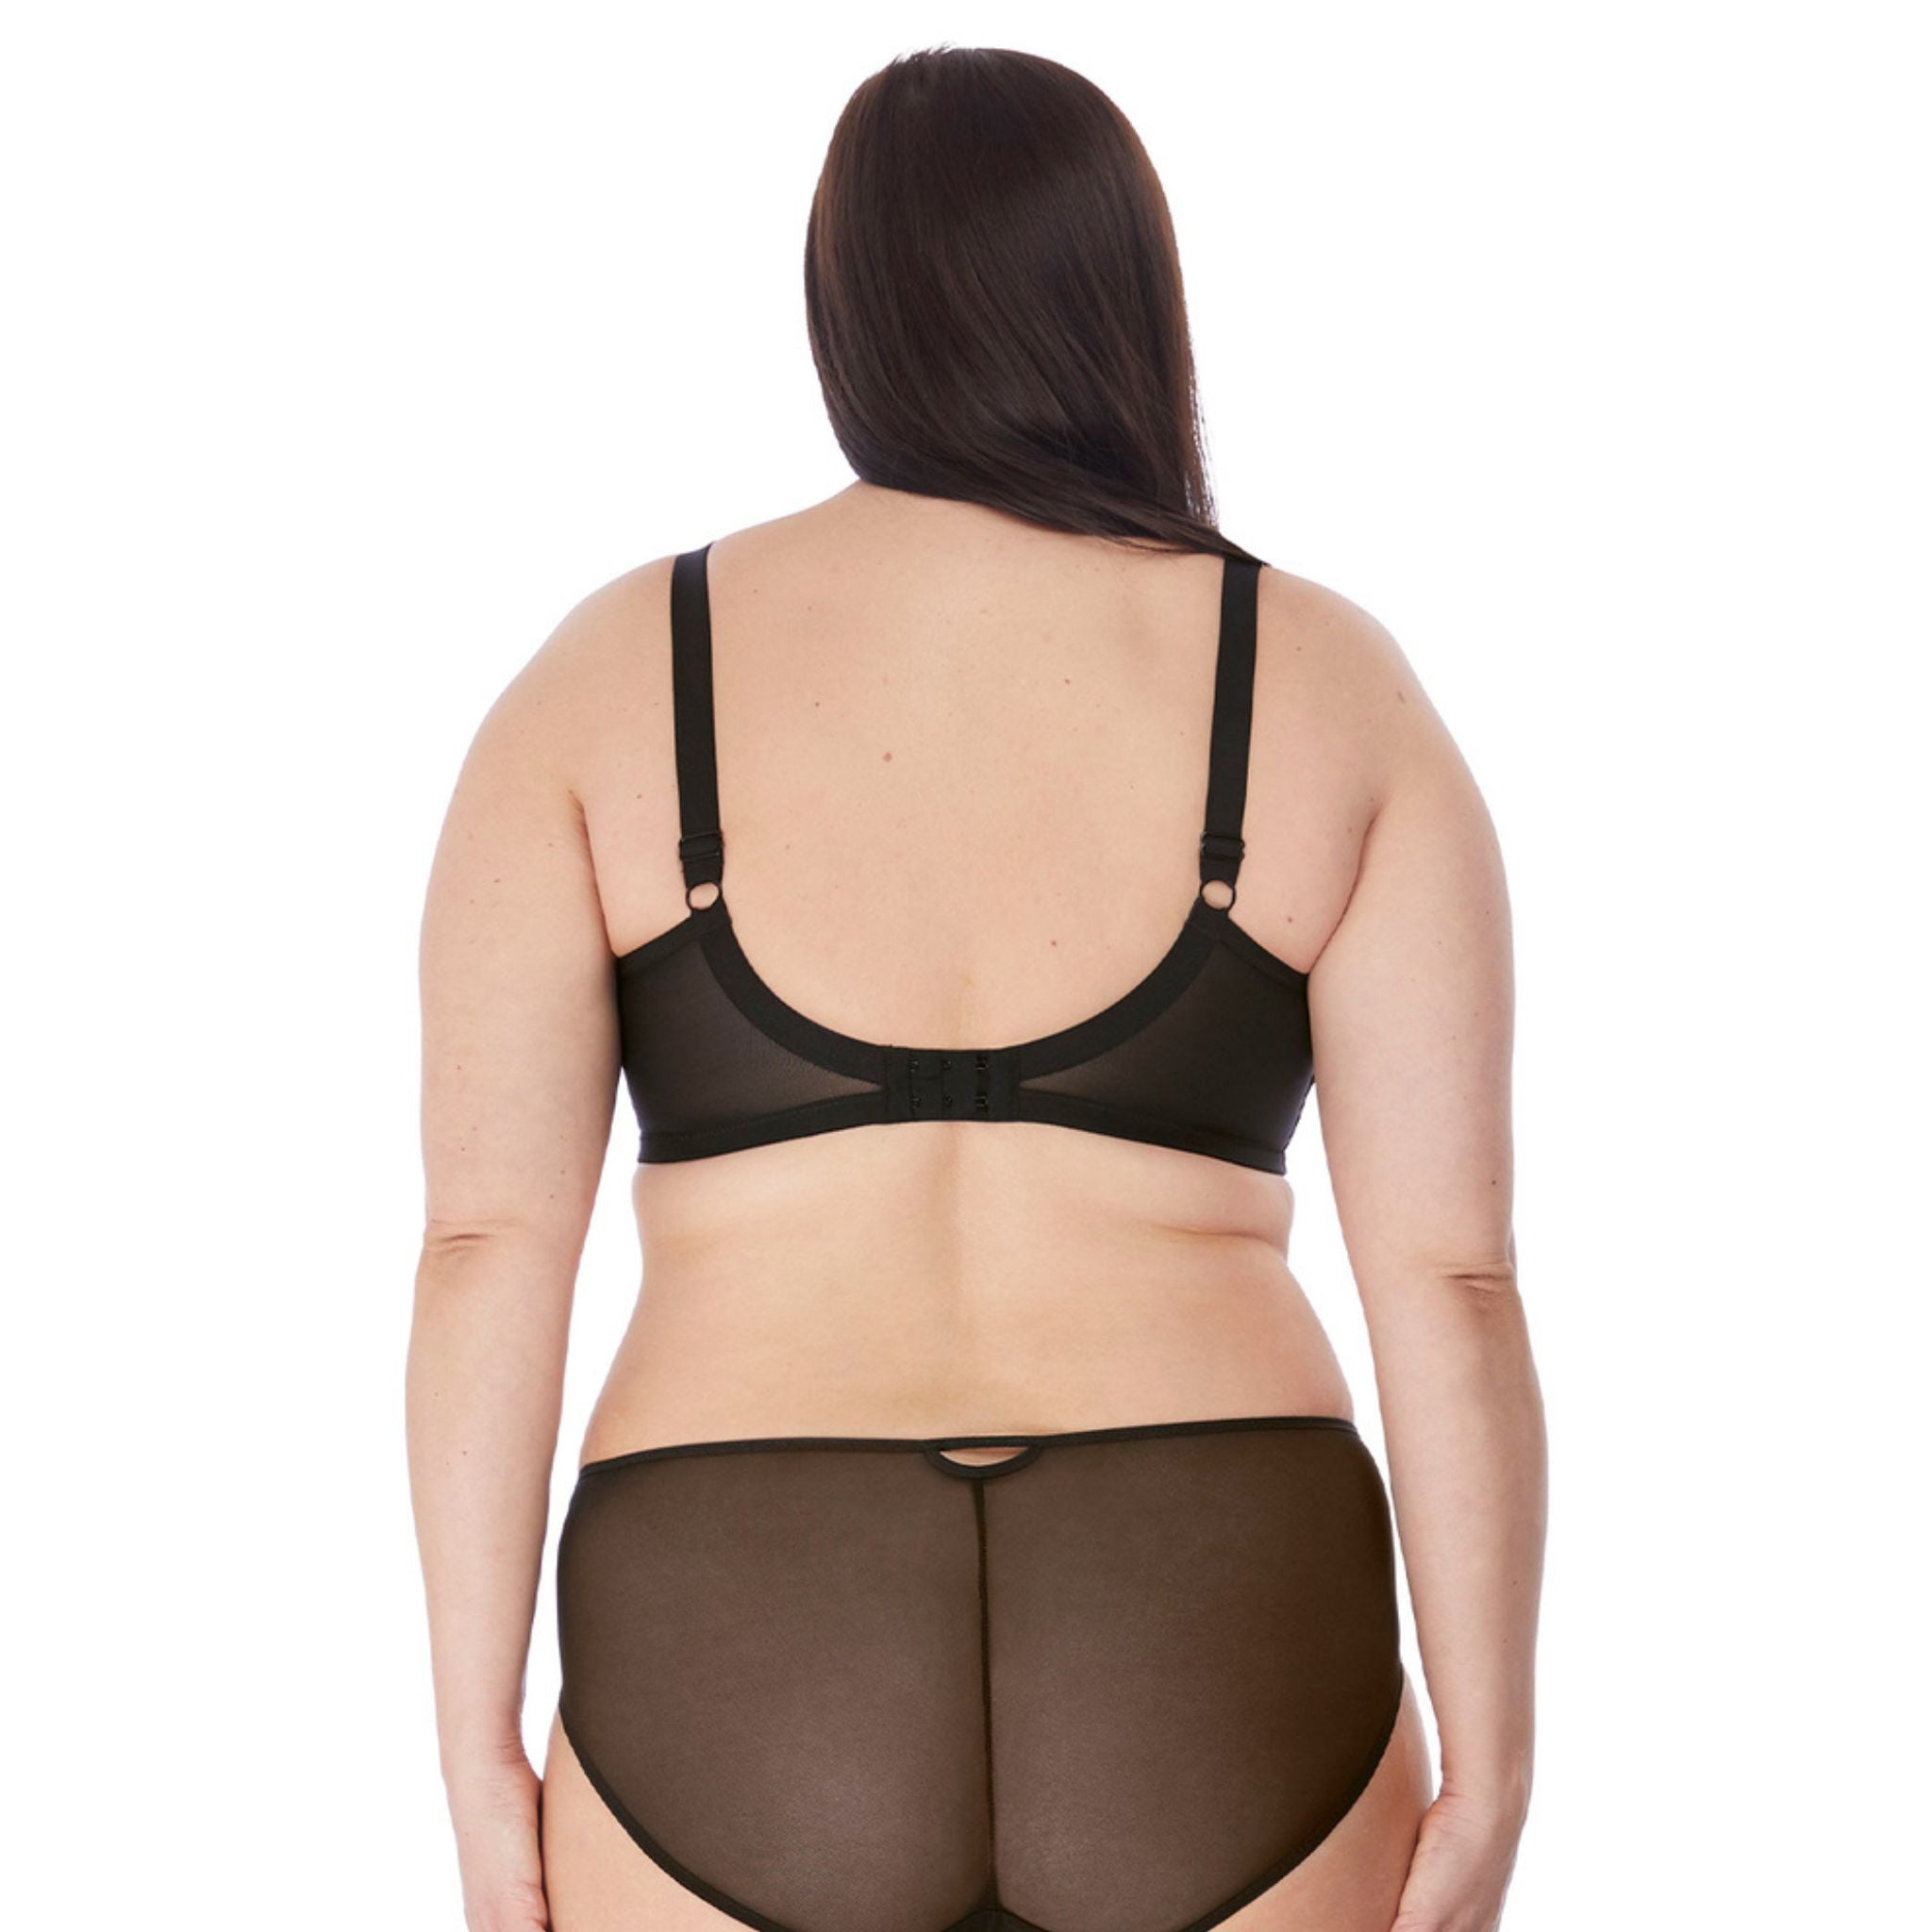 Simple yet striking, Sachi takes centre-stage with the Plunge Bra in a signature Black colourway. The bra showcases sheer and solid panelling with on-trend strap detailing, designed to be seen and emphasise cleavage. A three piece cup offers forward shape and uplift in cup sizes DD - JJ.